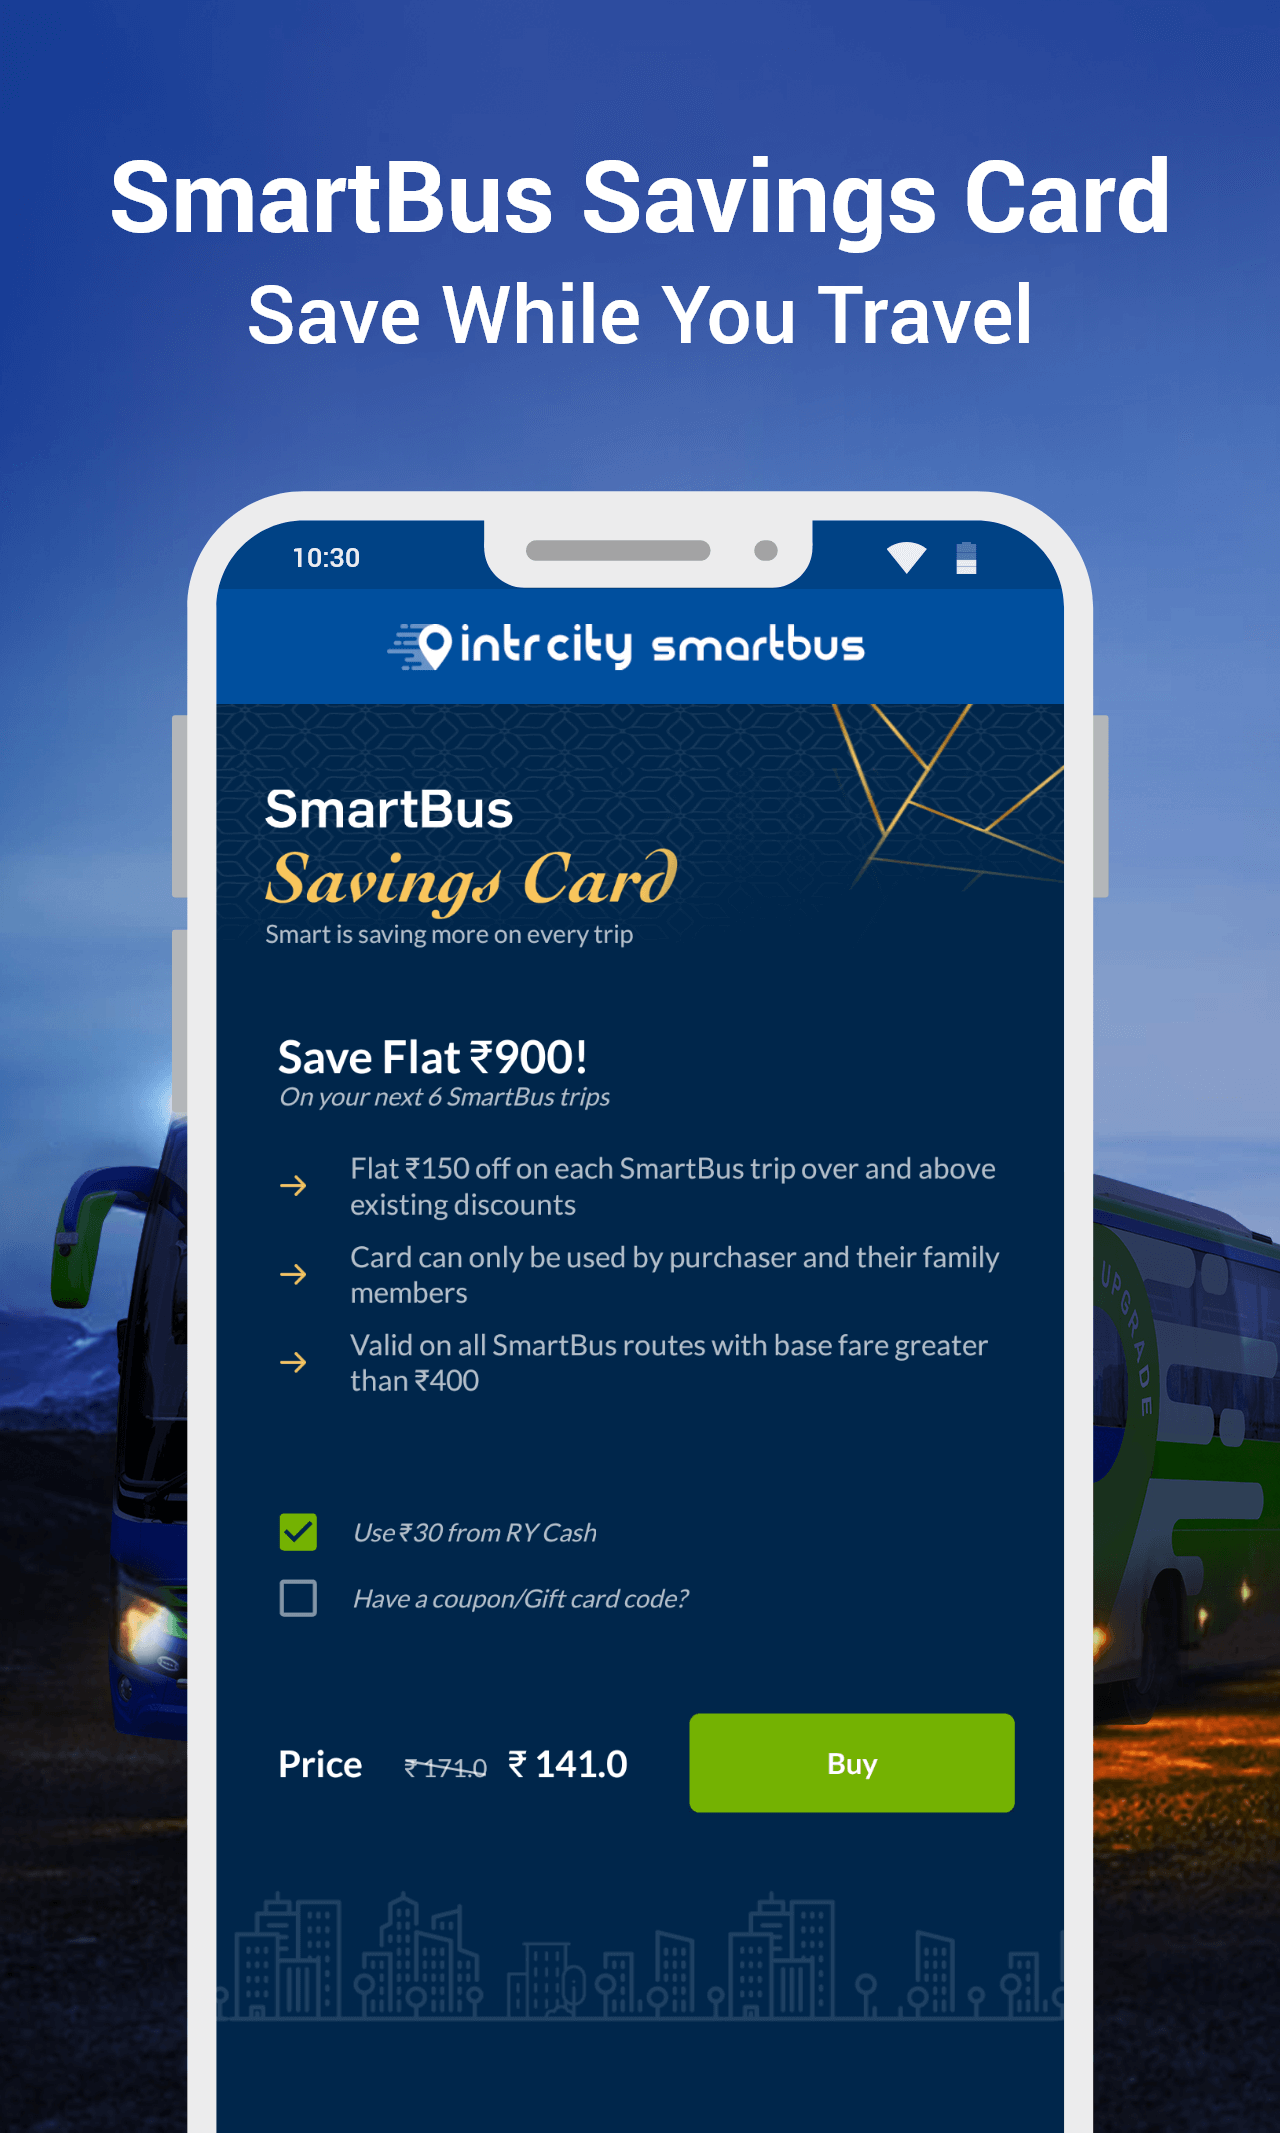 IntrCity: Bus Ticket Booking